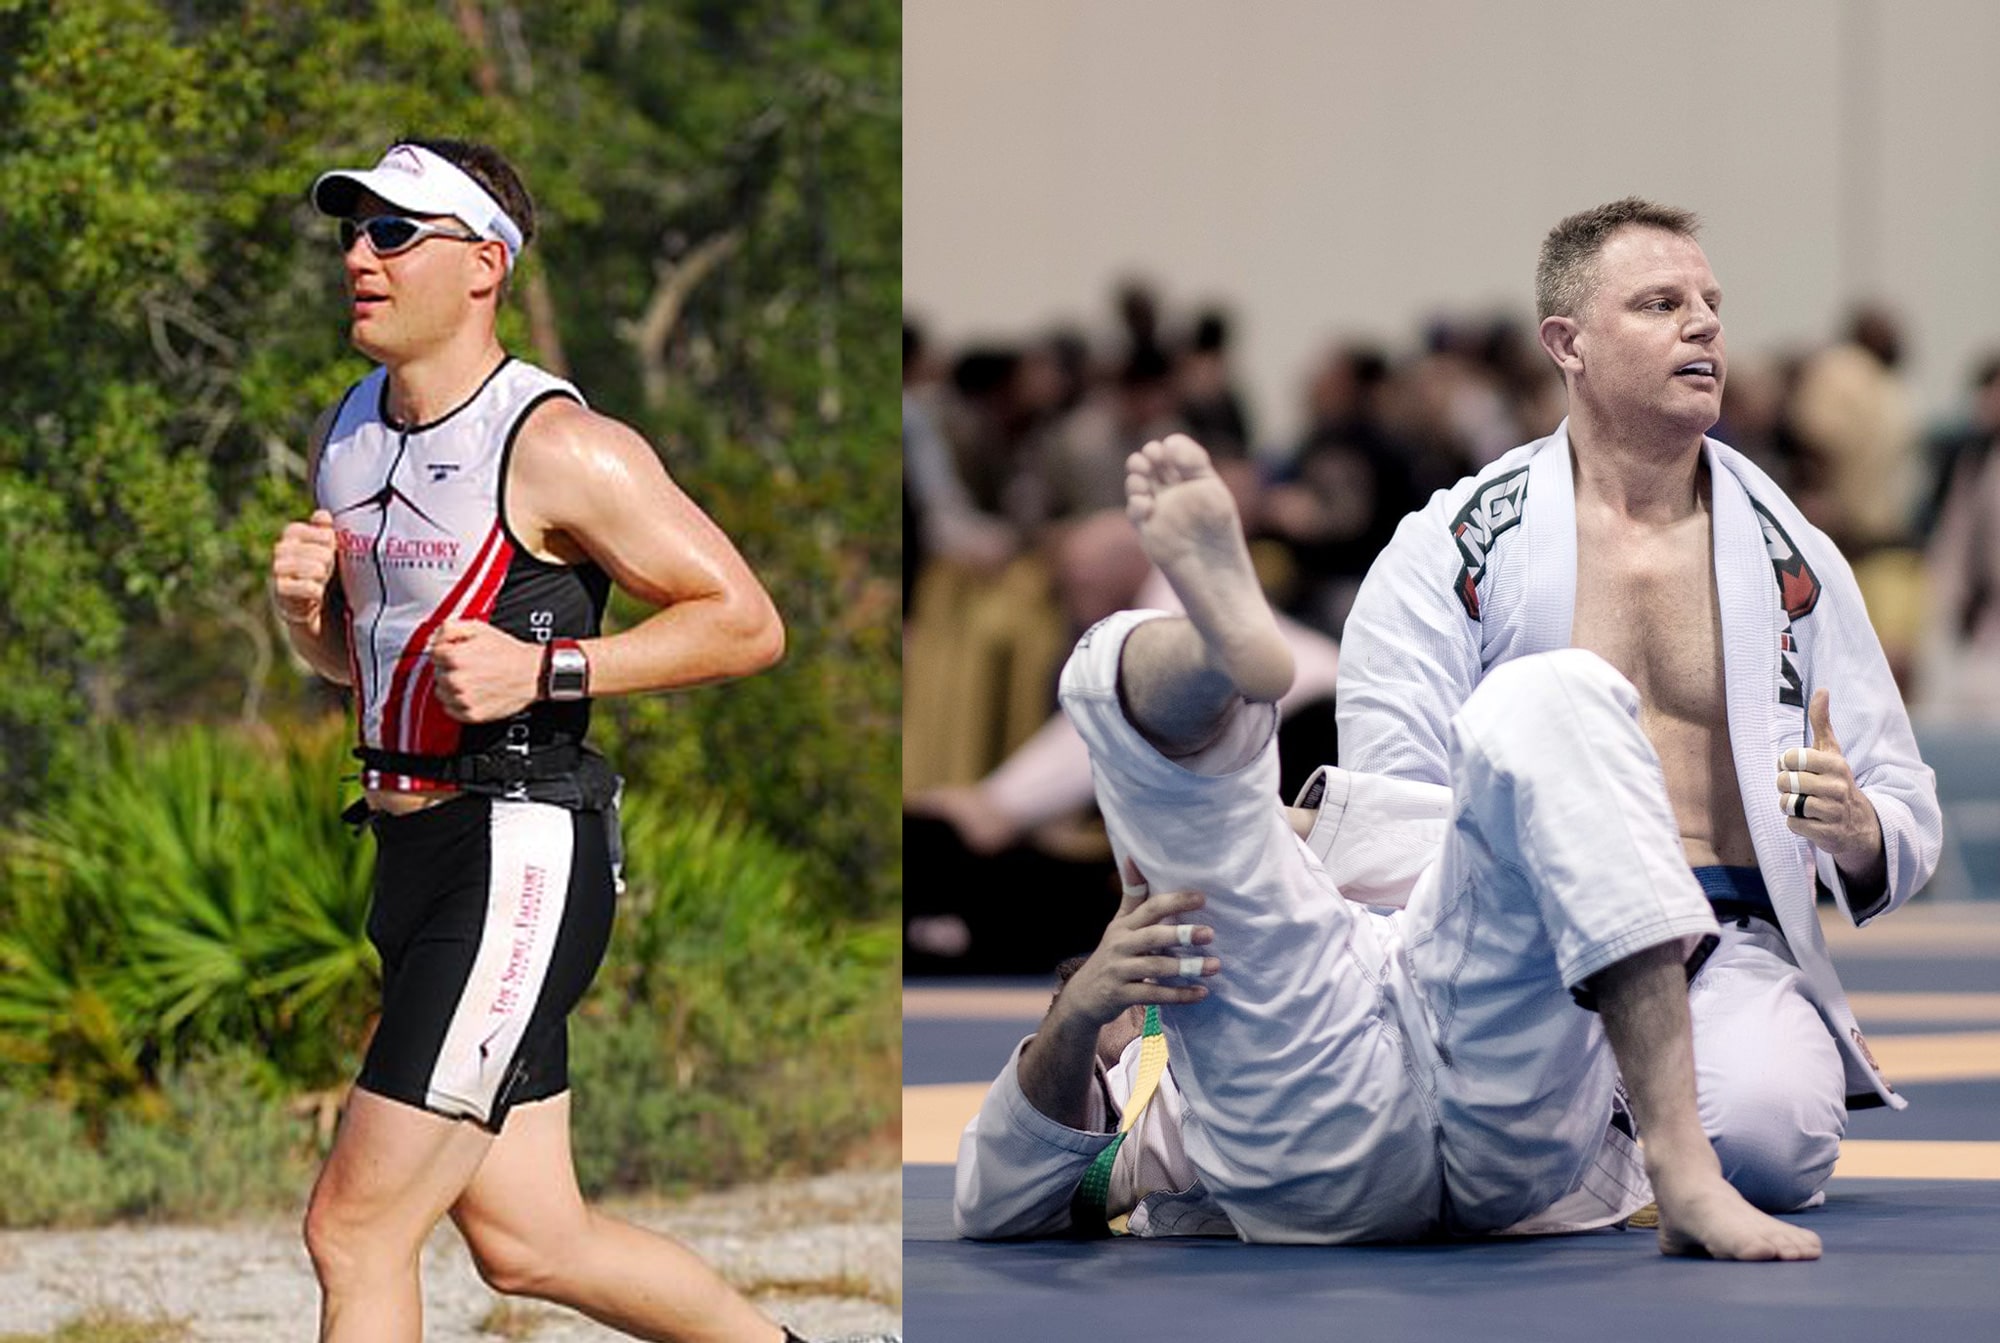 From Endurance Sport to BJJ with Paul Kindzia